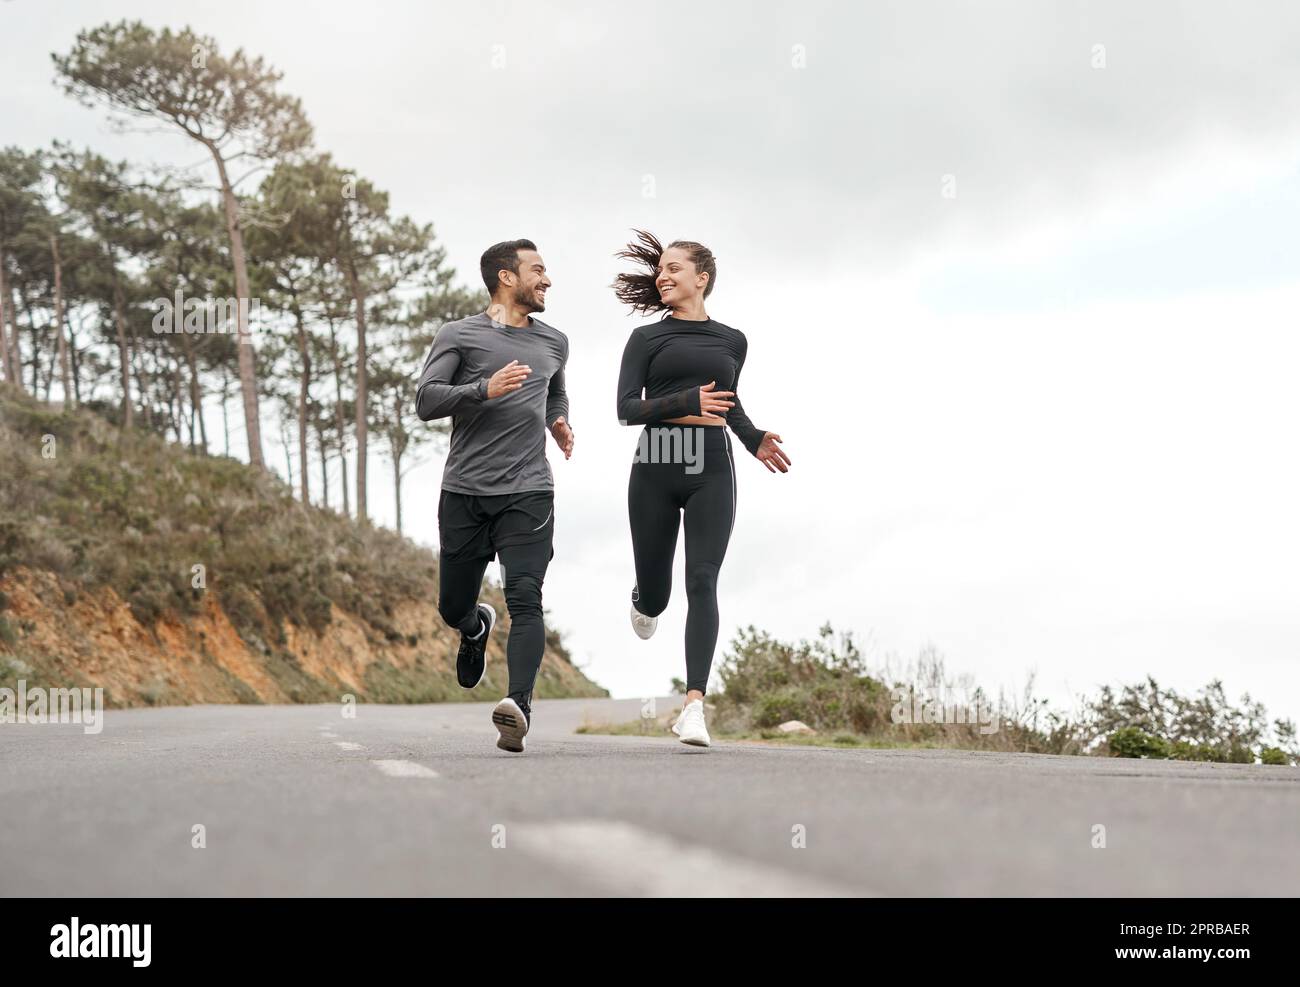 Were each others source of motivation. Full length shot of two young athletes bonding together during a run outdoors. Stock Photo